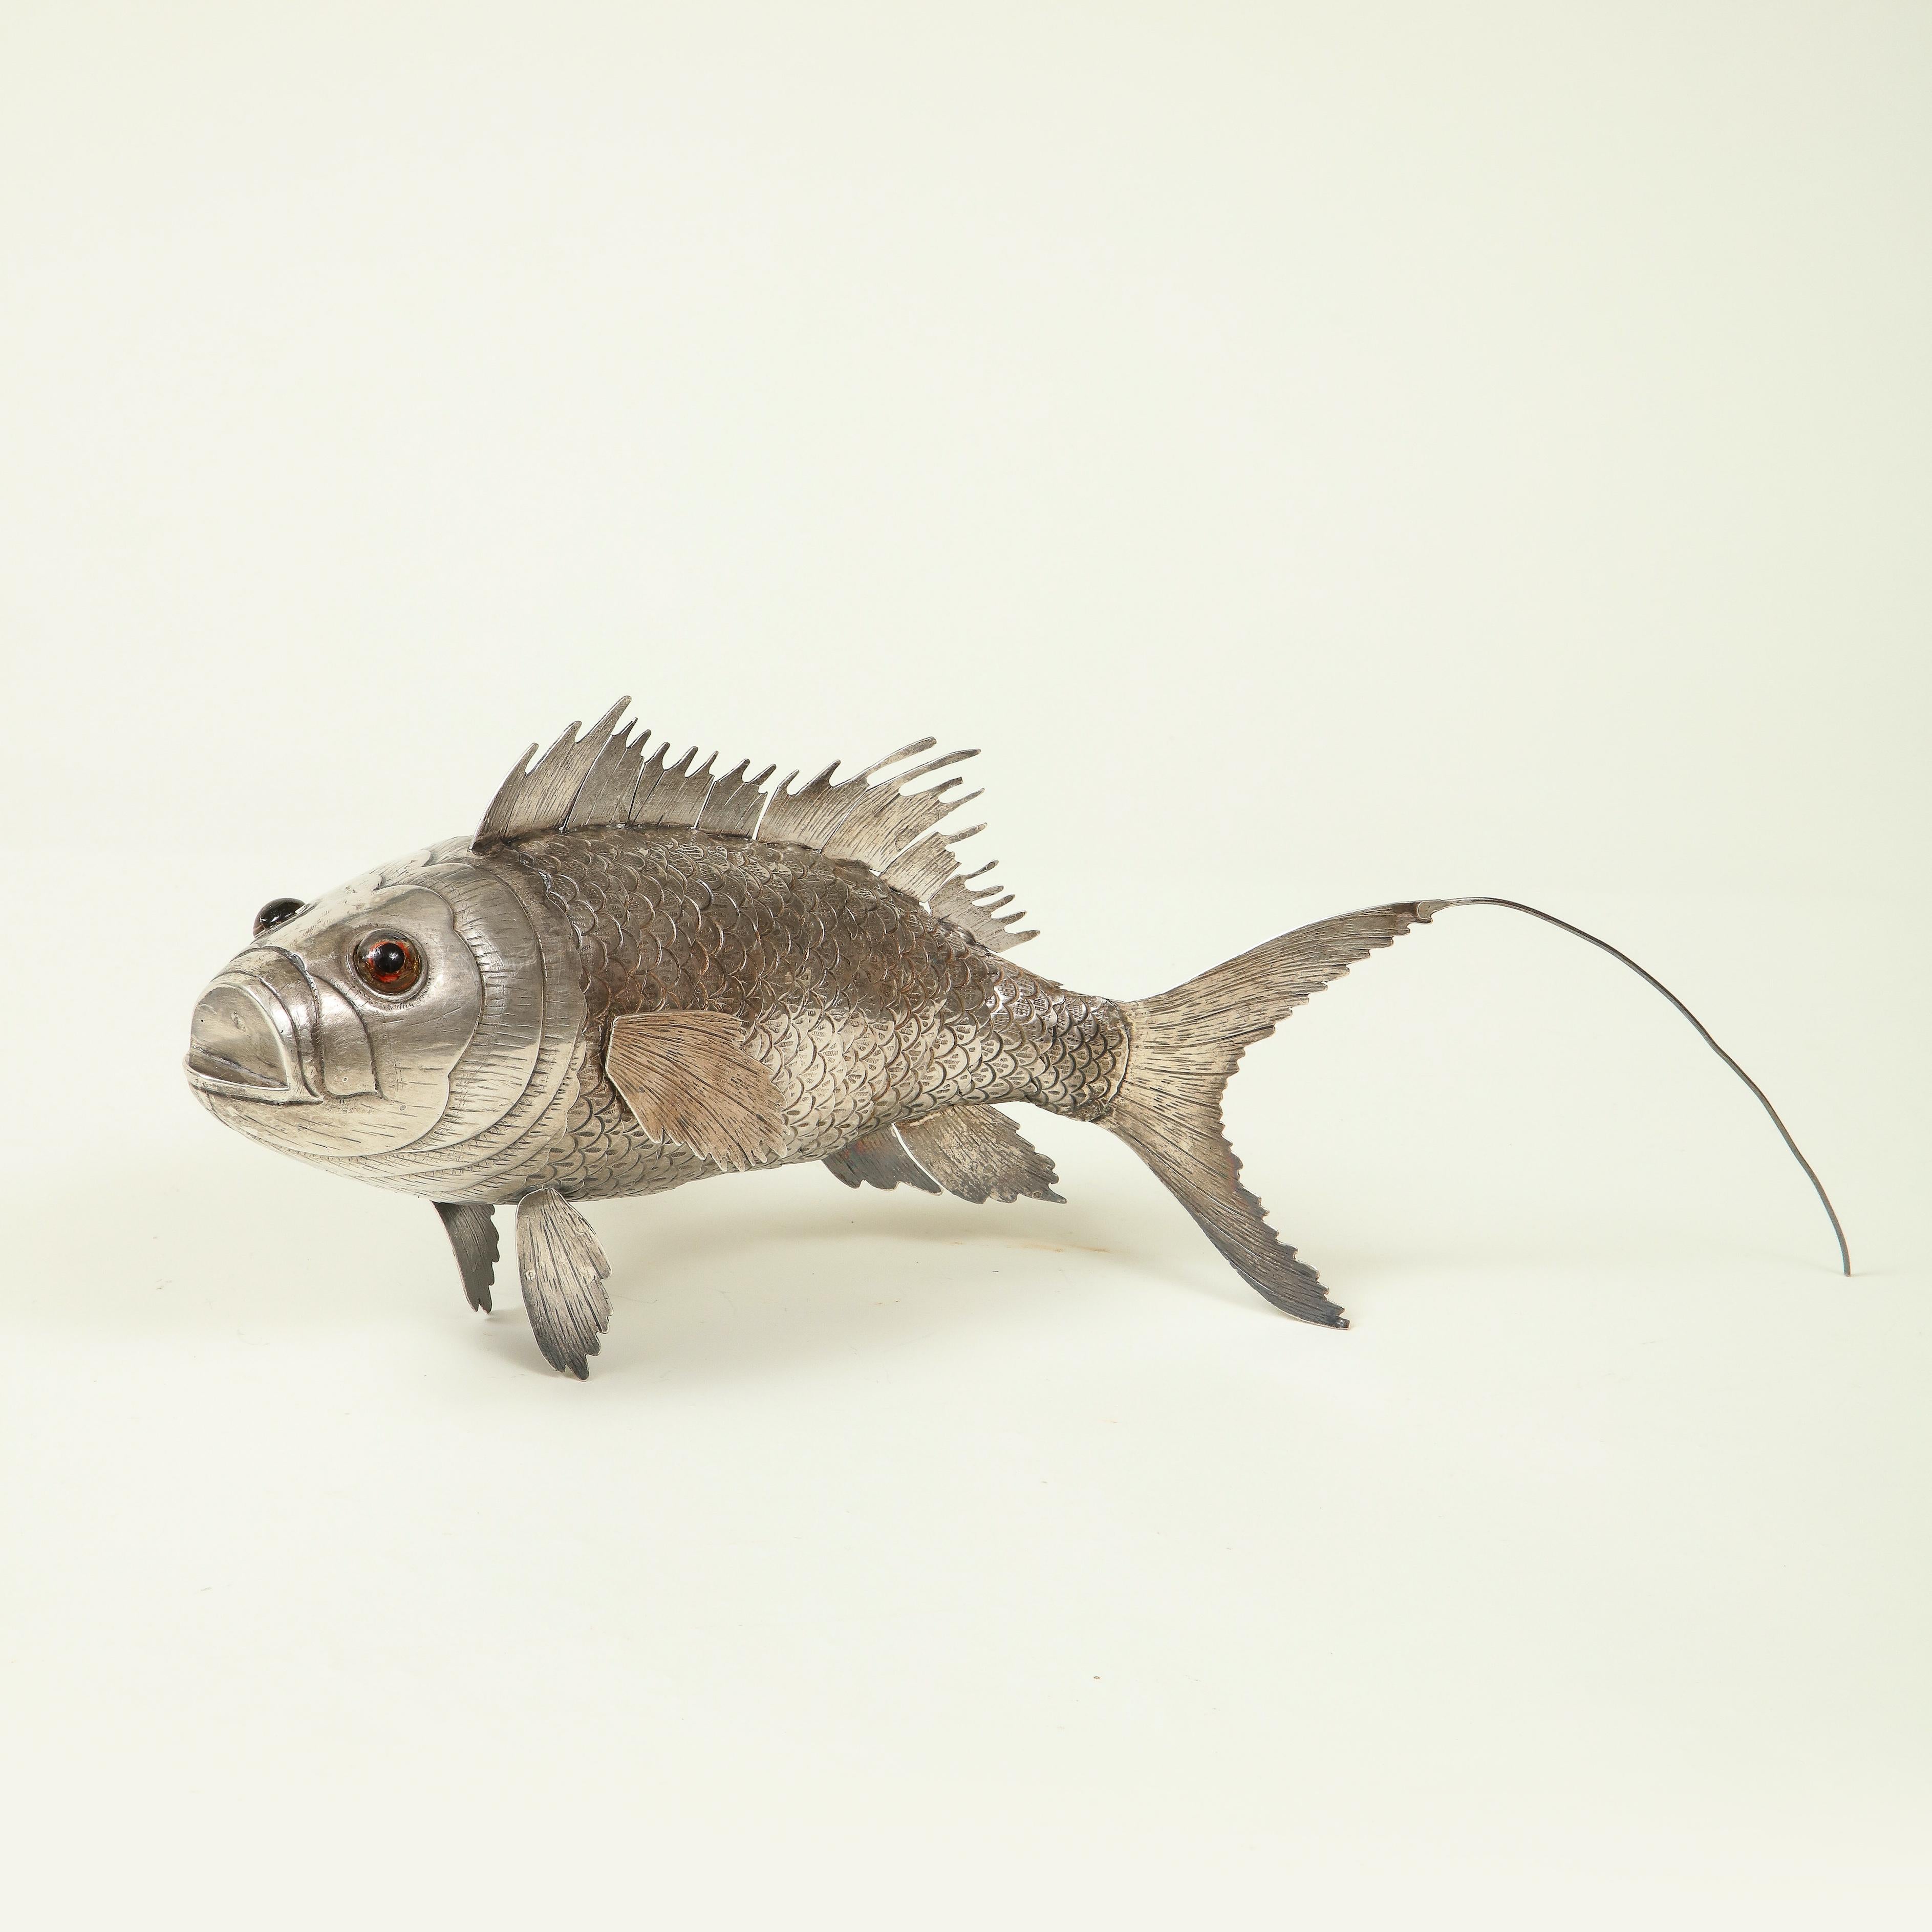 The head, with jeweled eyes, and the body realistically modeled with articulated sections allowing the body and the fins to move from side to side.

Provenance: From the Collection of Mario Buatta, New York, NY.